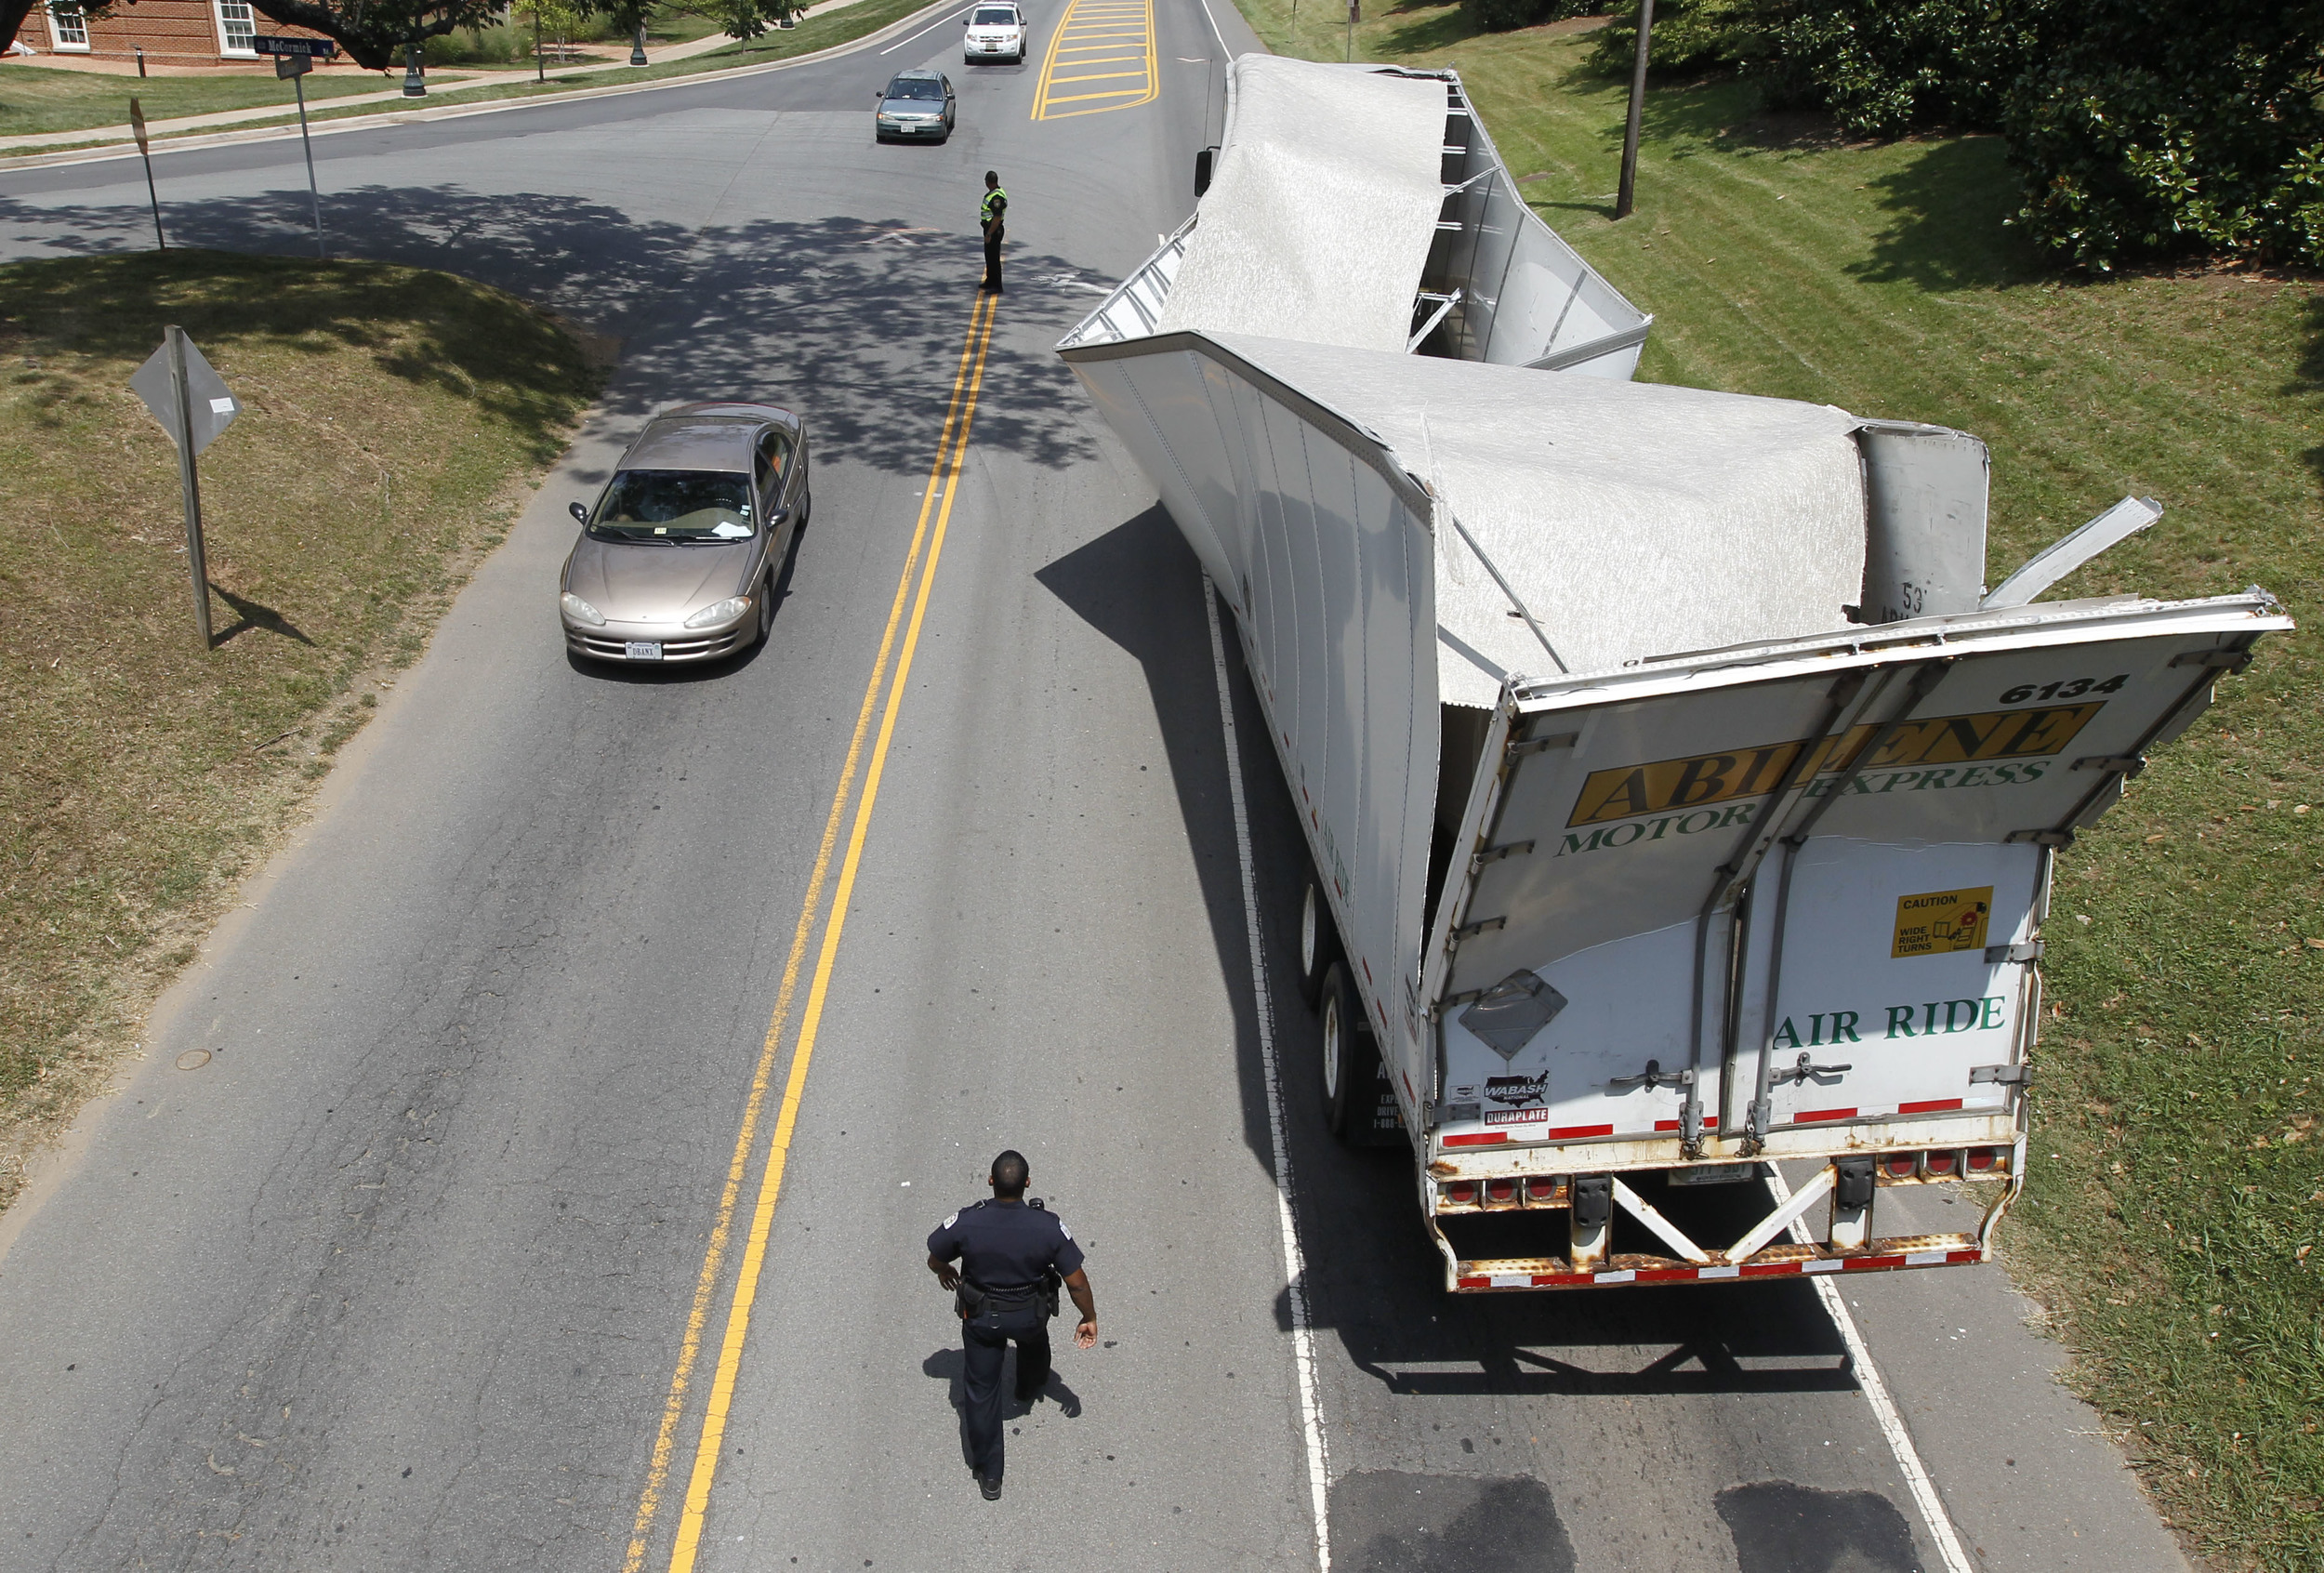  A sand-carrying semi-tractor and trailer struck the McCormick Road bridge over Emmet Street on Thursday, damaging the trailer. The Abilene Motor Express truck, with an estimated height of about 13 feet, 5 inches tall, tried to negotiate the bridge w